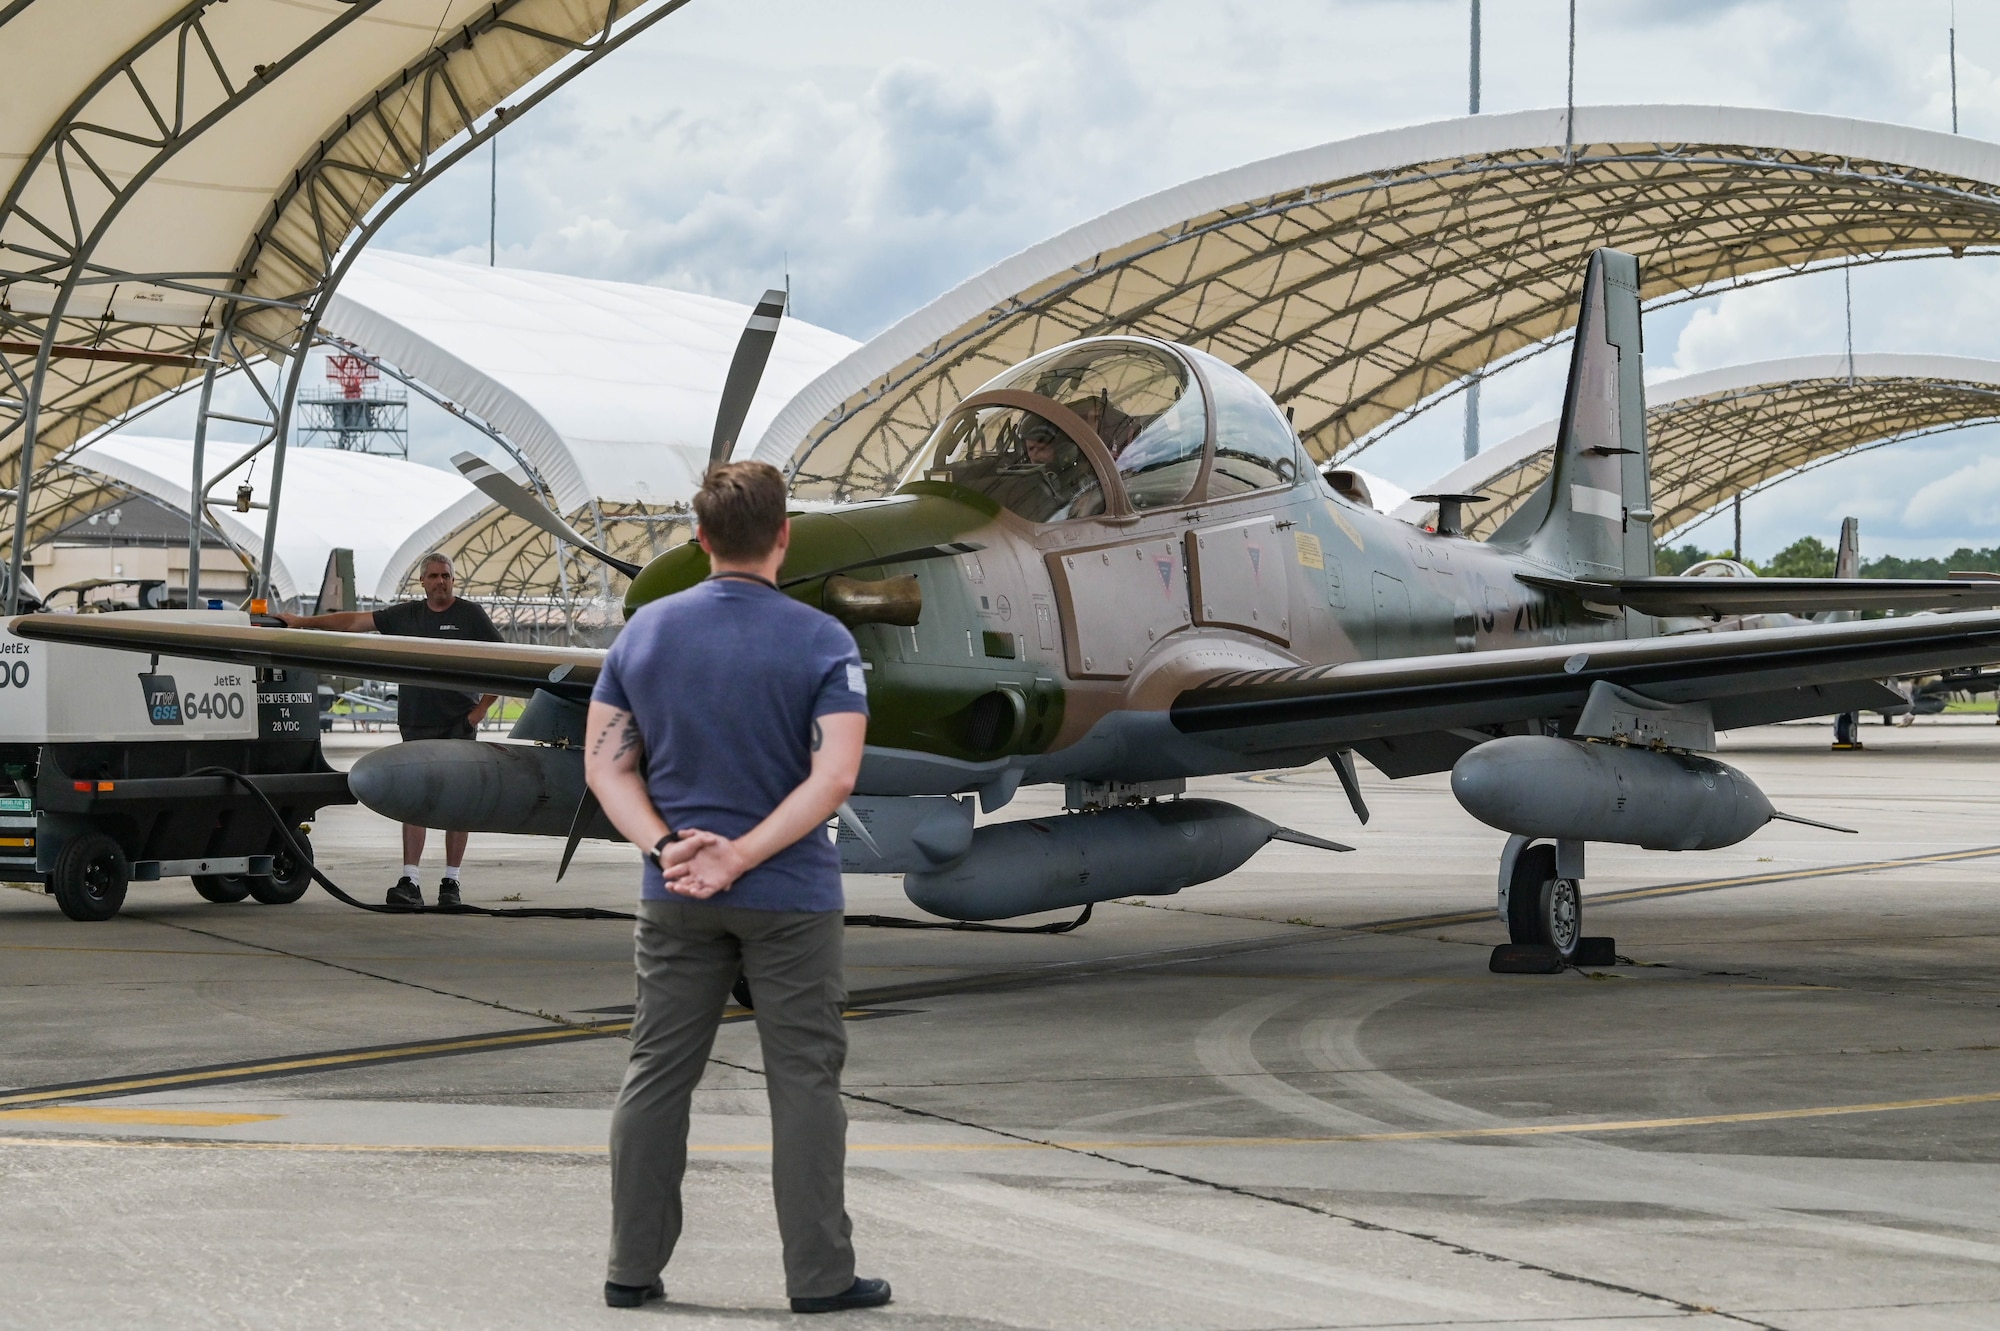 U.S. Air Force contractor Travis Smith, 81st Fighter Squadron A-29 Super Tucano aircraft technician, prepares to marshal an A-29 Super Tucano pilot for departure at Moody Air Force Base, Georgia, Sept. 15, 2021. The aircraft are being transported to Nigeria by U.S. Air Force contracted pilots. (U.S. Air Force photo by Senior Airman Rebeckah Medeiros)